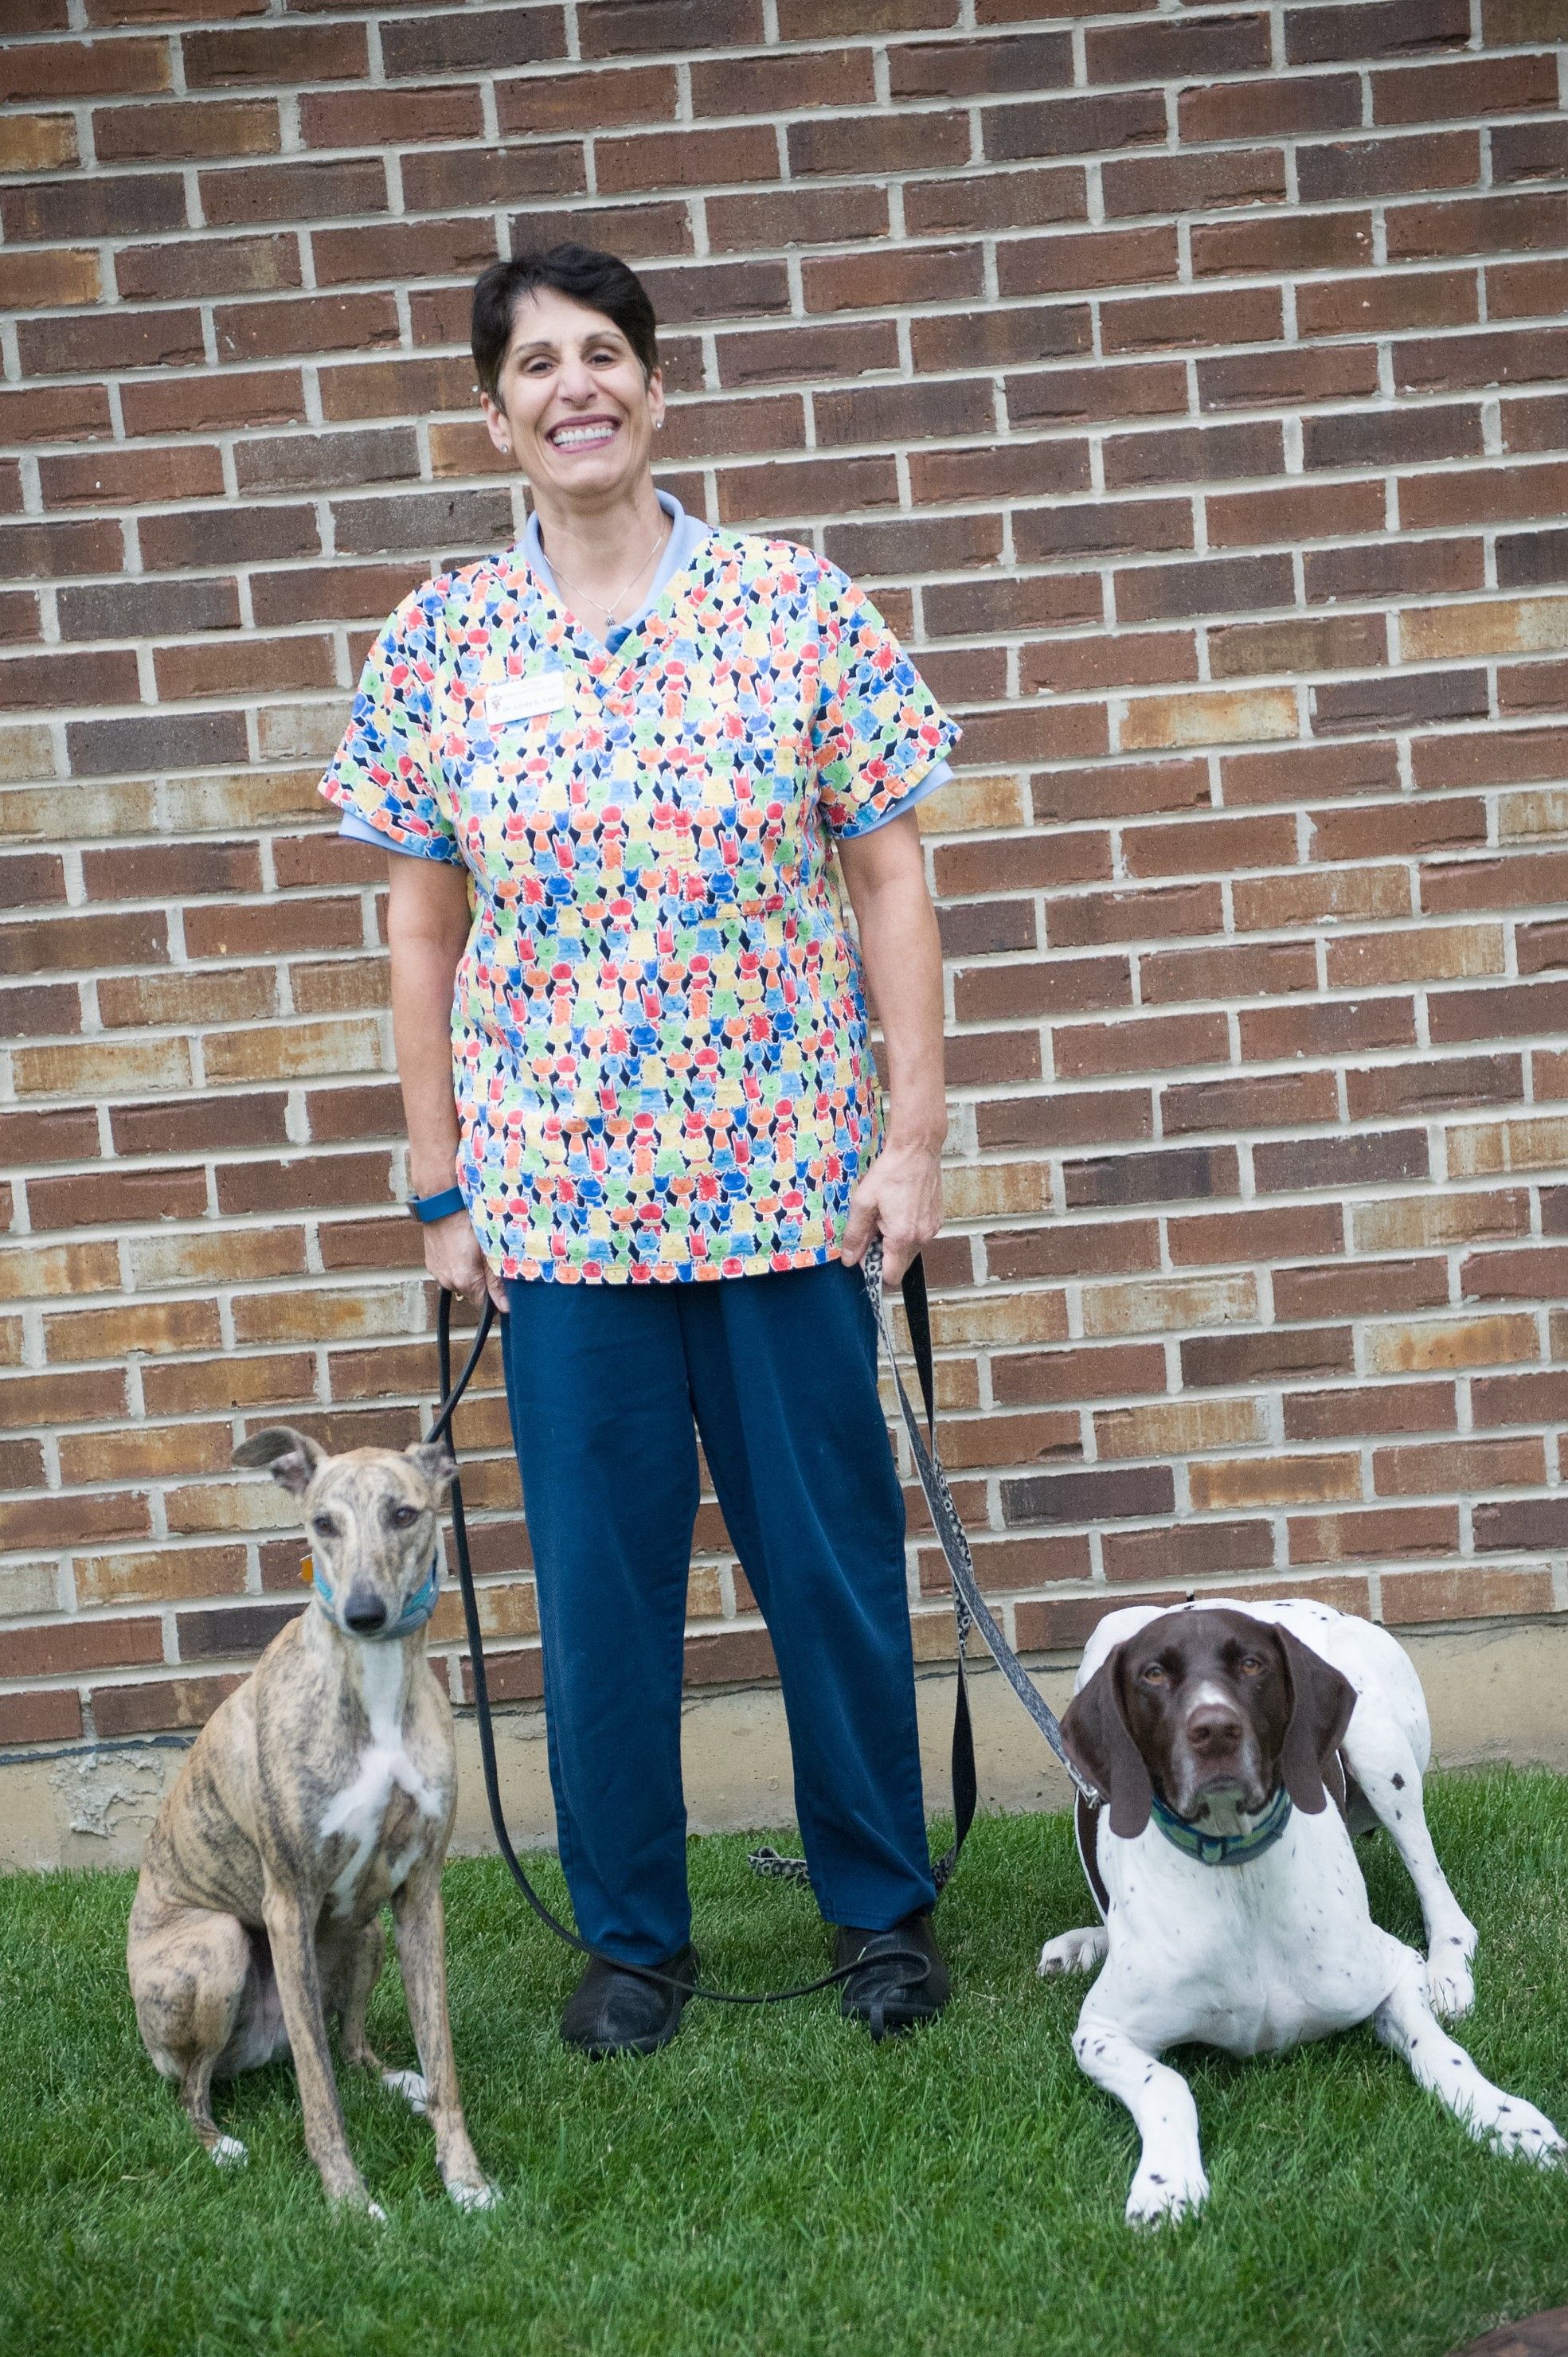 Meet The Team at All Paws Veterinary Clinic